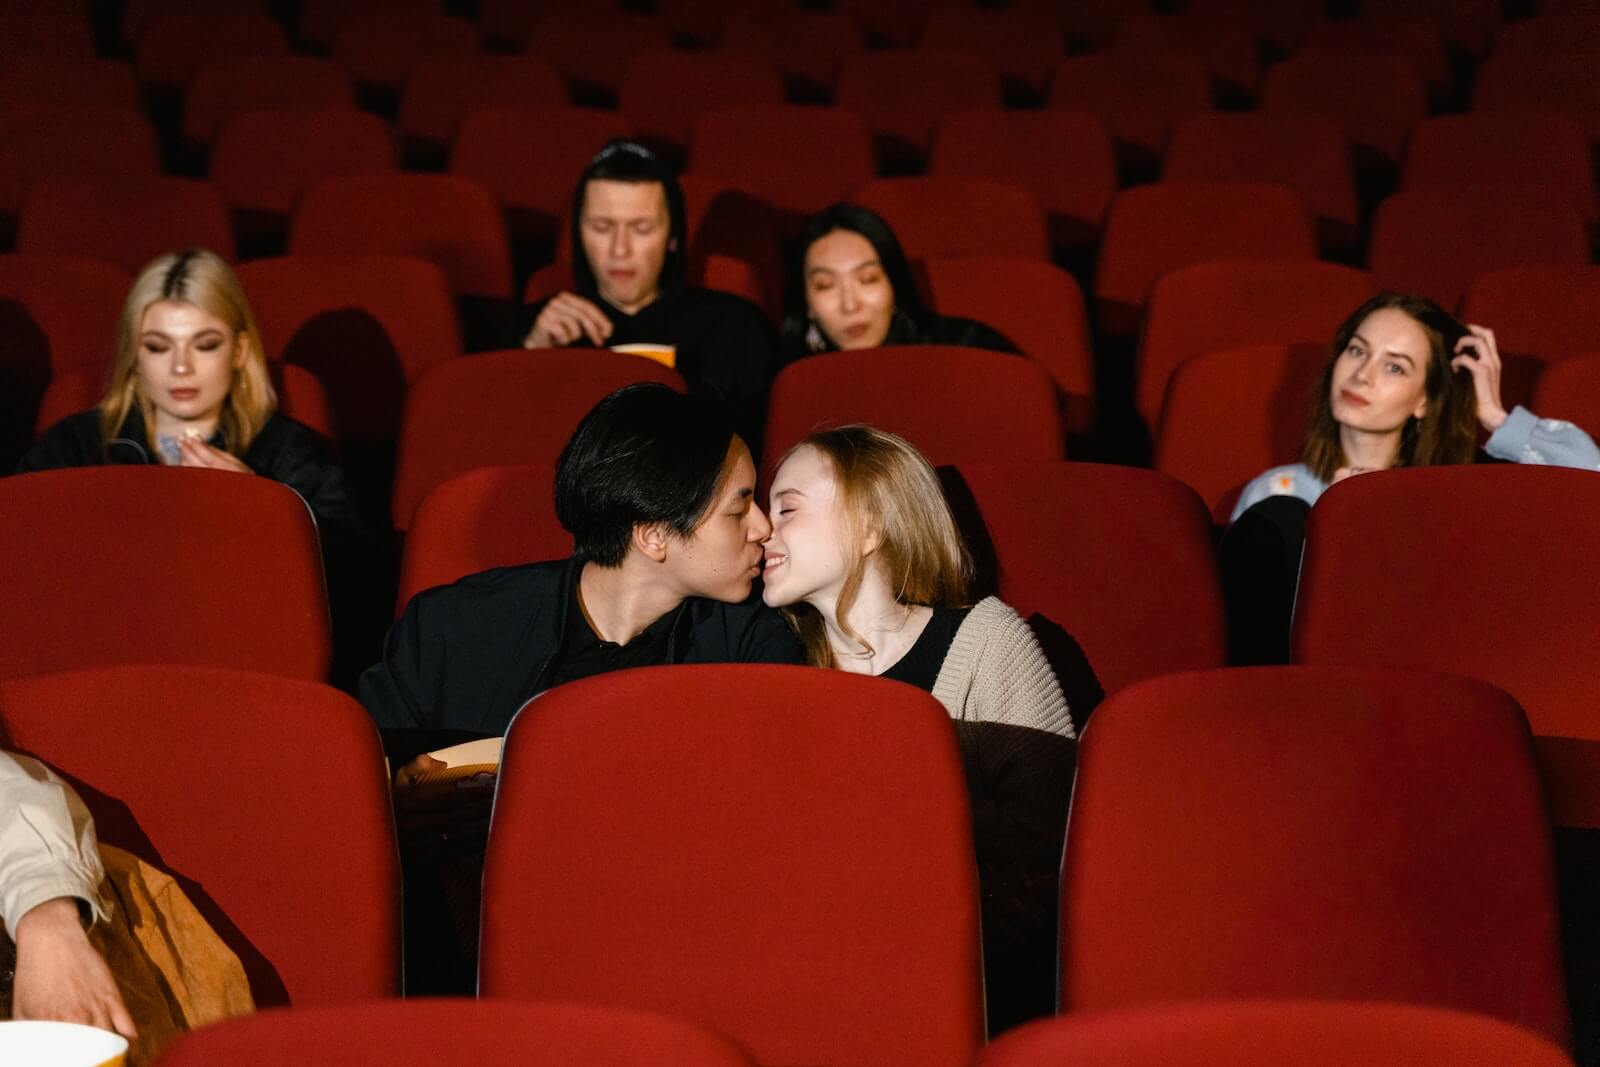 A Couple Kissing in the Cinema